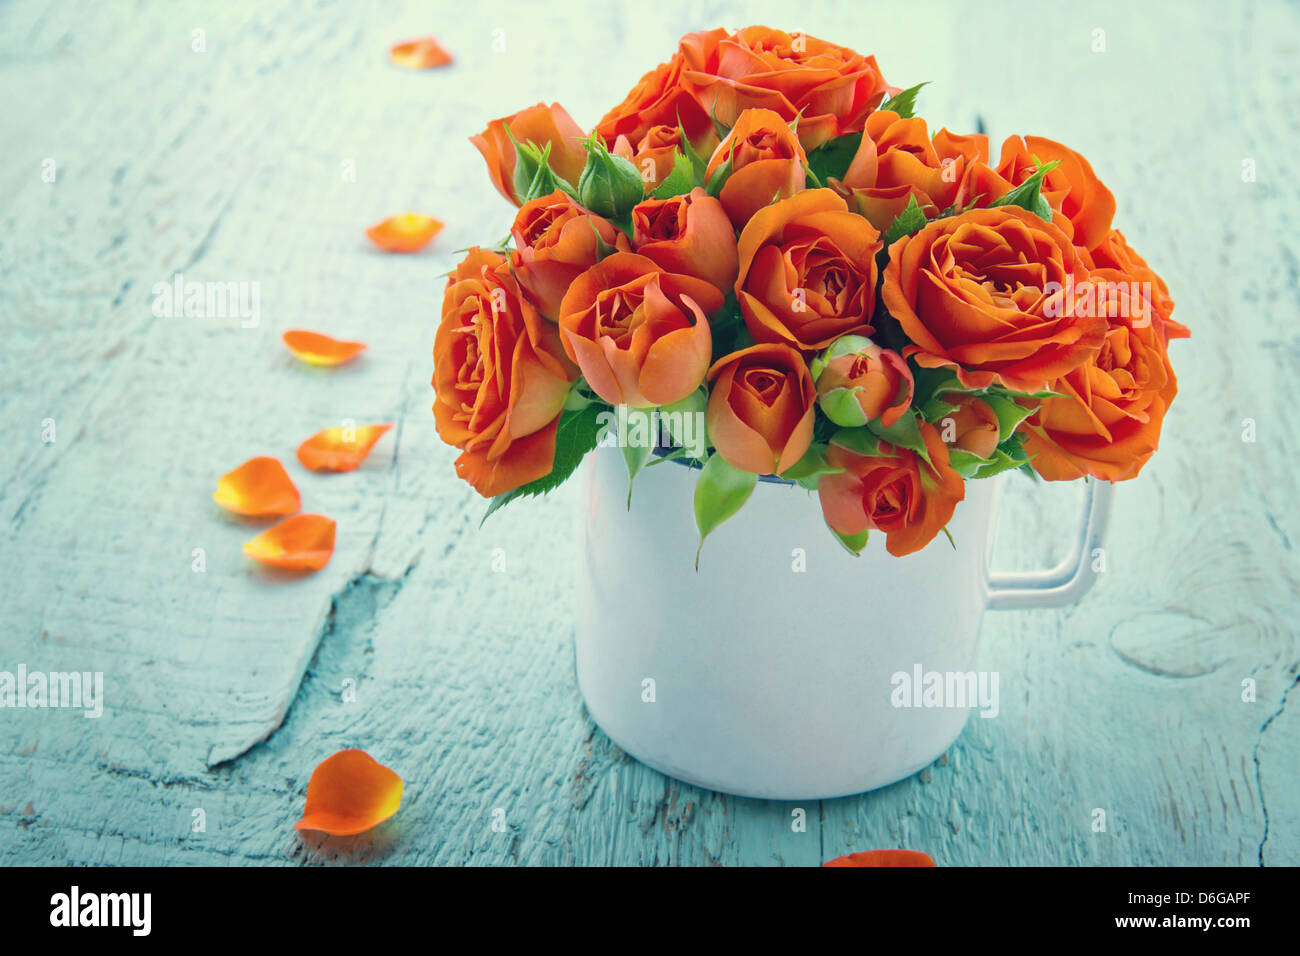 Vintage edited orange roses in a white cup on blue shabby chic wooden background Stock Photo